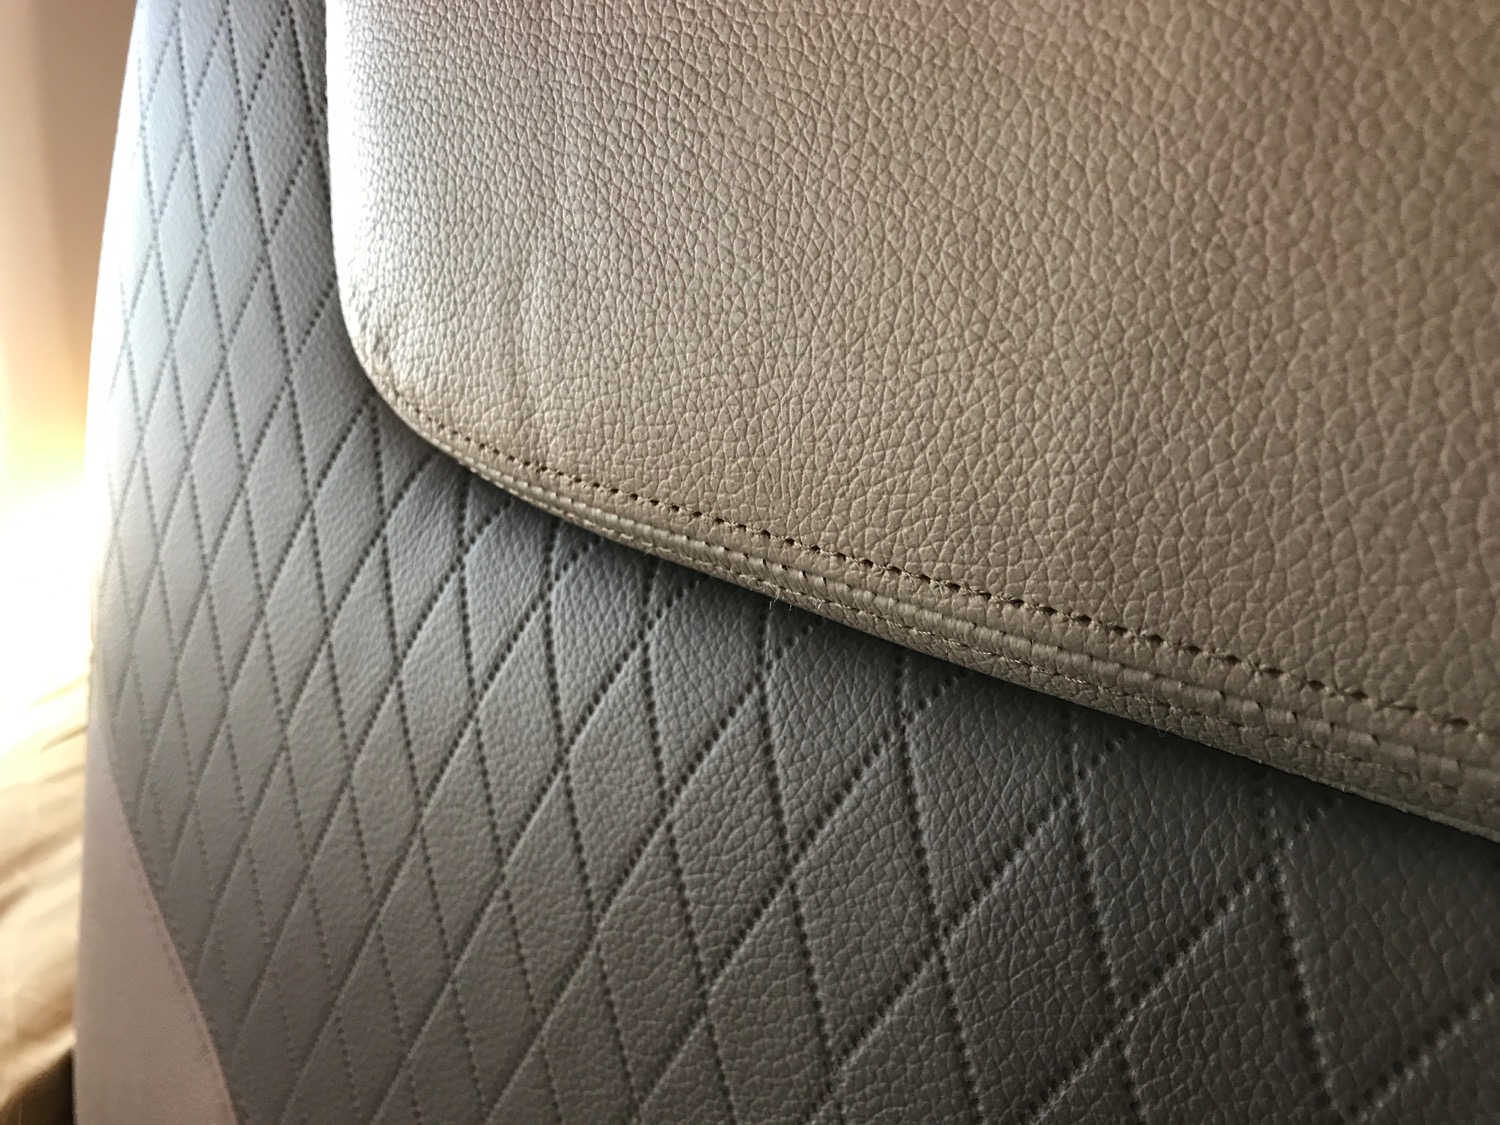 Close-up of leather seats